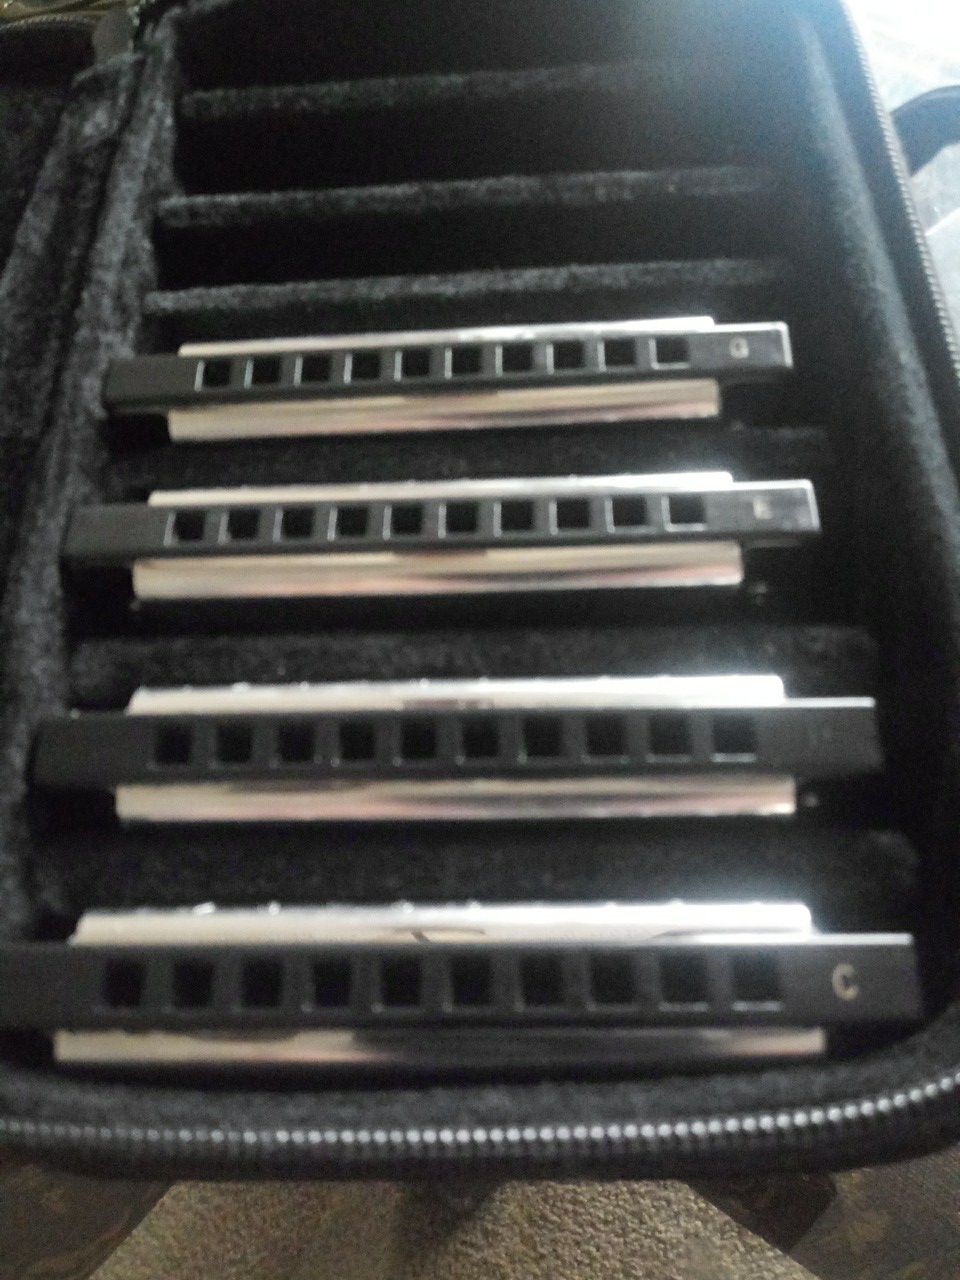 (4)- "Fender 'Blues Deluxe'" Harmonica set with heavy-duty carrying case!